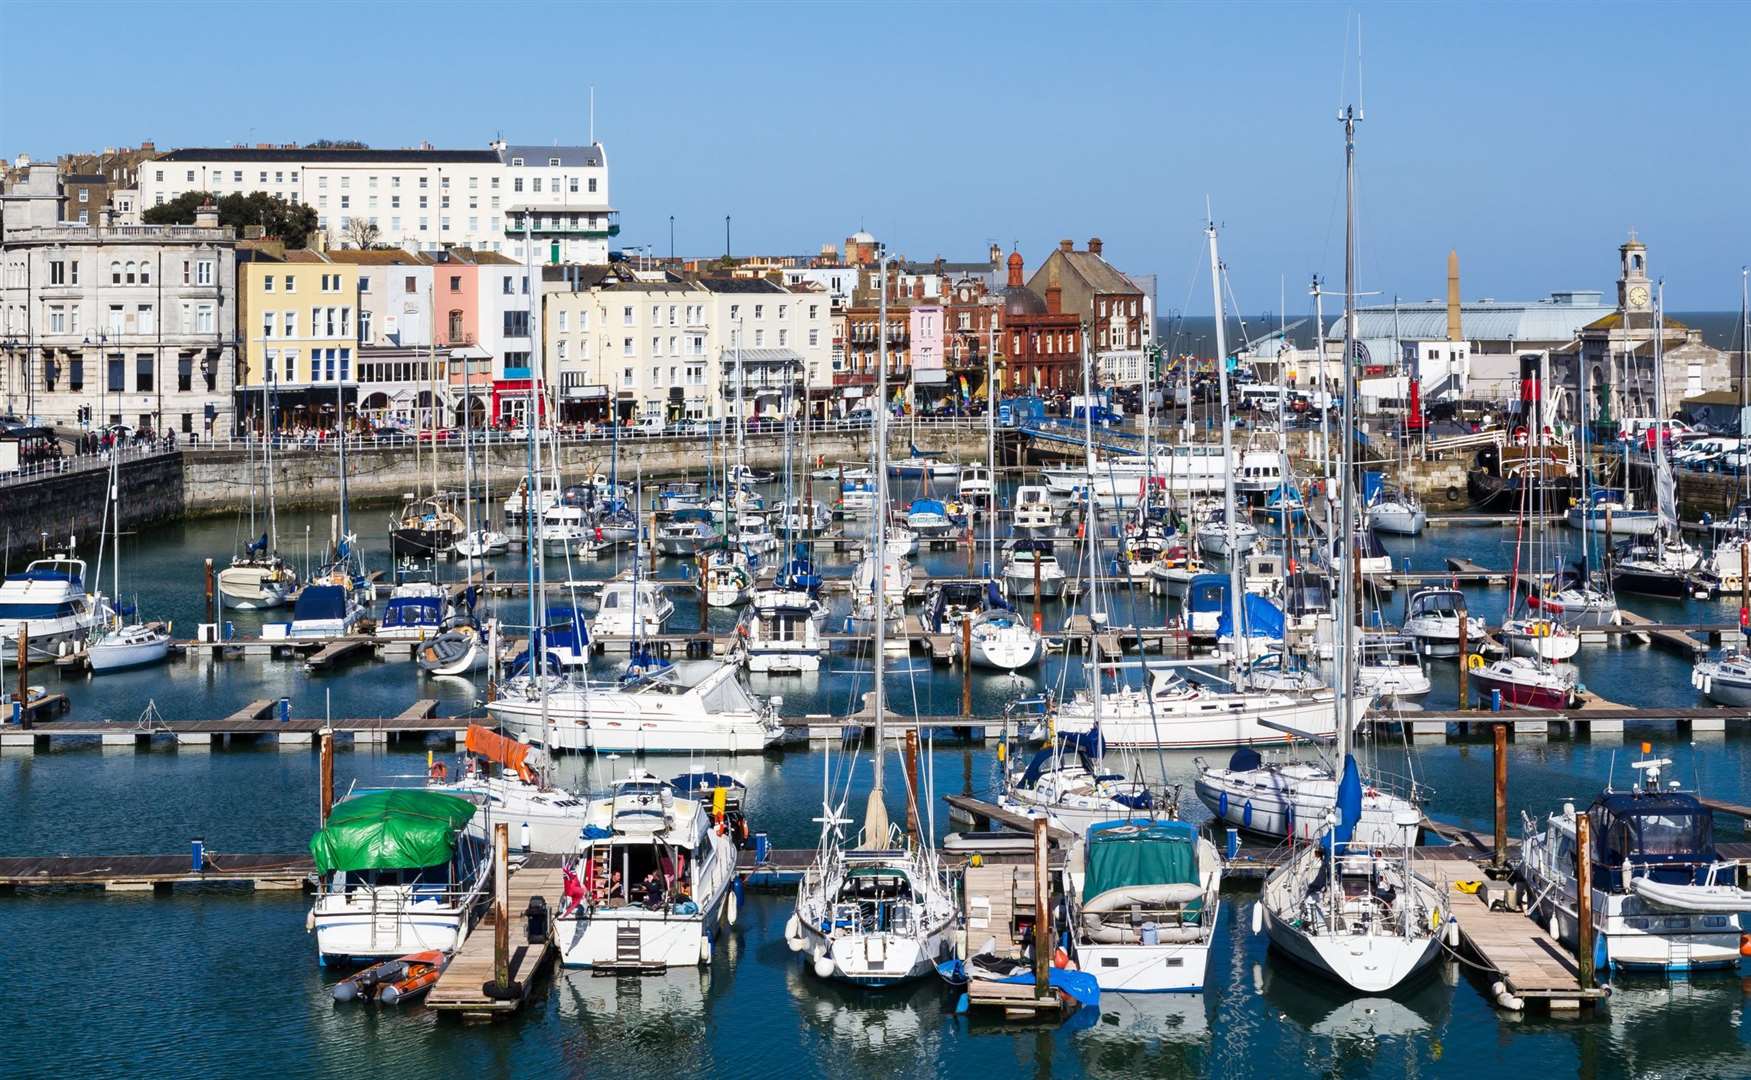 Ramsgate and its marina has seen a new lease of life in recent years